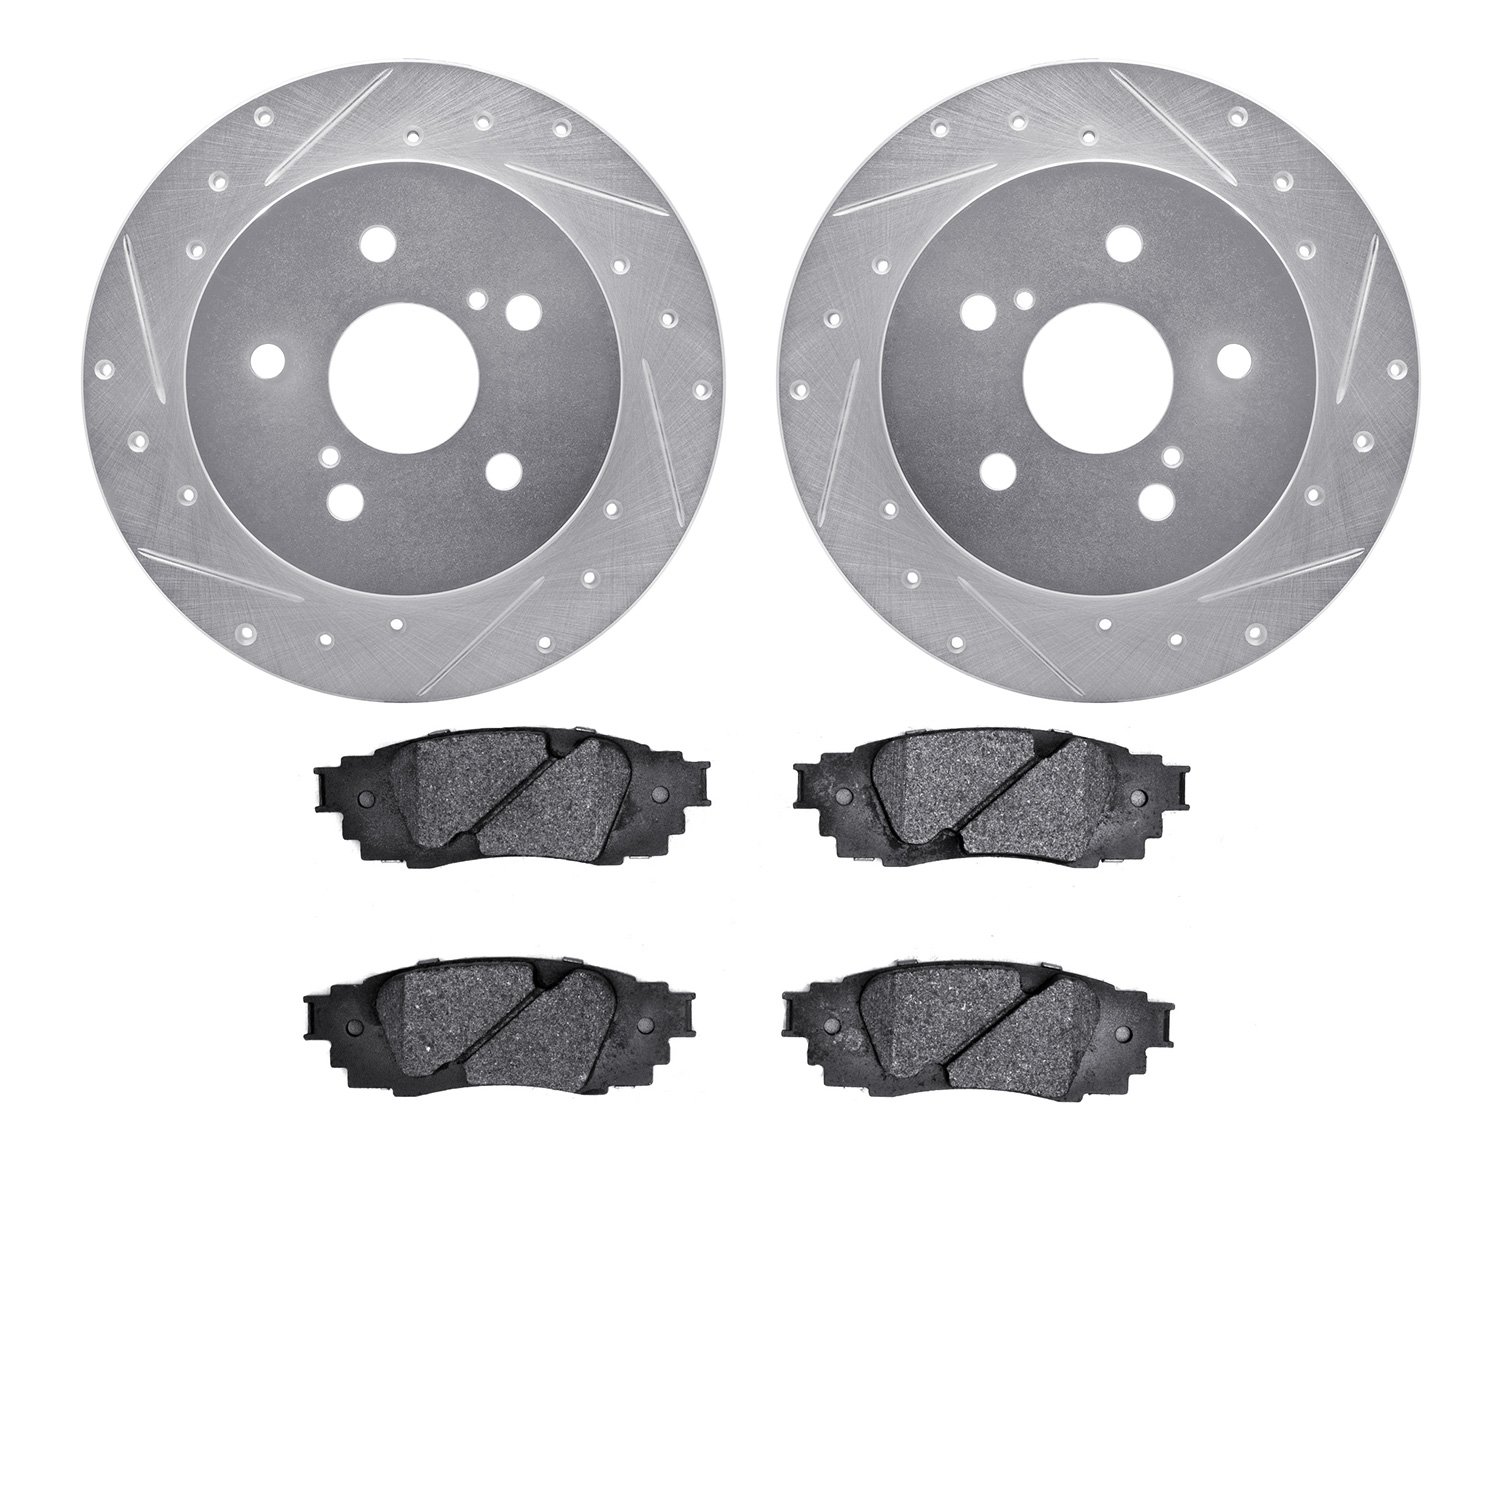 7302-75037 Drilled/Slotted Brake Rotor with 3000-Series Ceramic Brake Pads Kit [Silver], Fits Select Lexus/Toyota/Scion, Positio